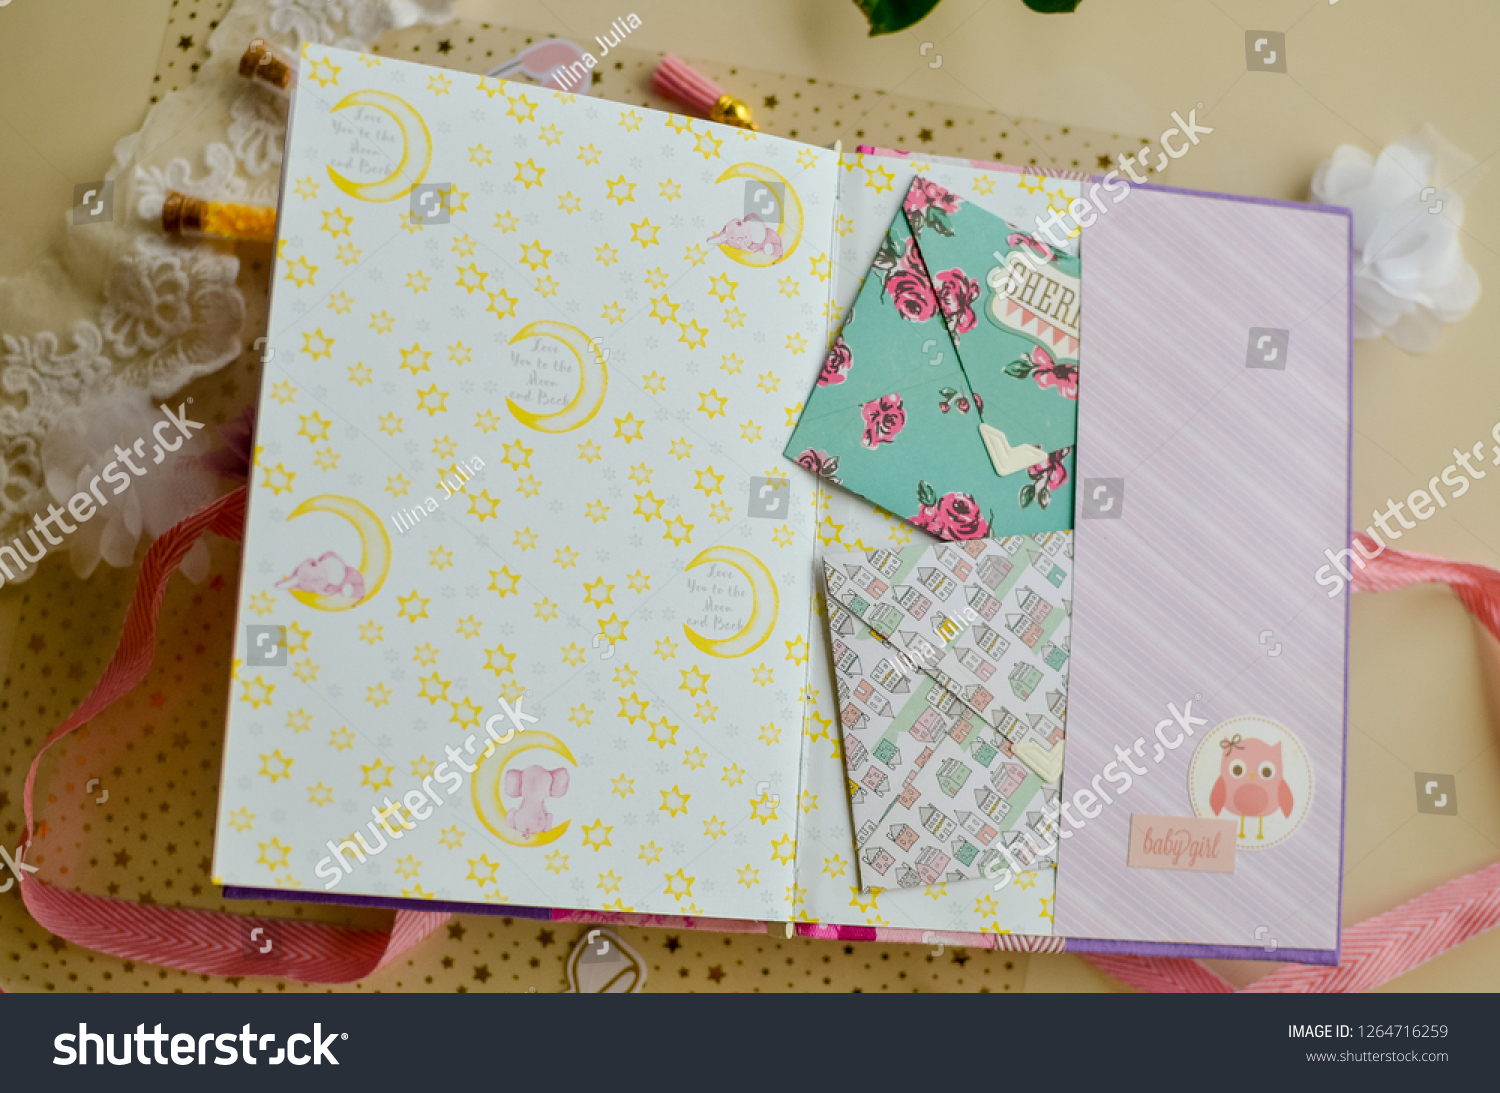 Top view of table with elements for scrapbooking. Kids scrapbooking photo album   #1264716259